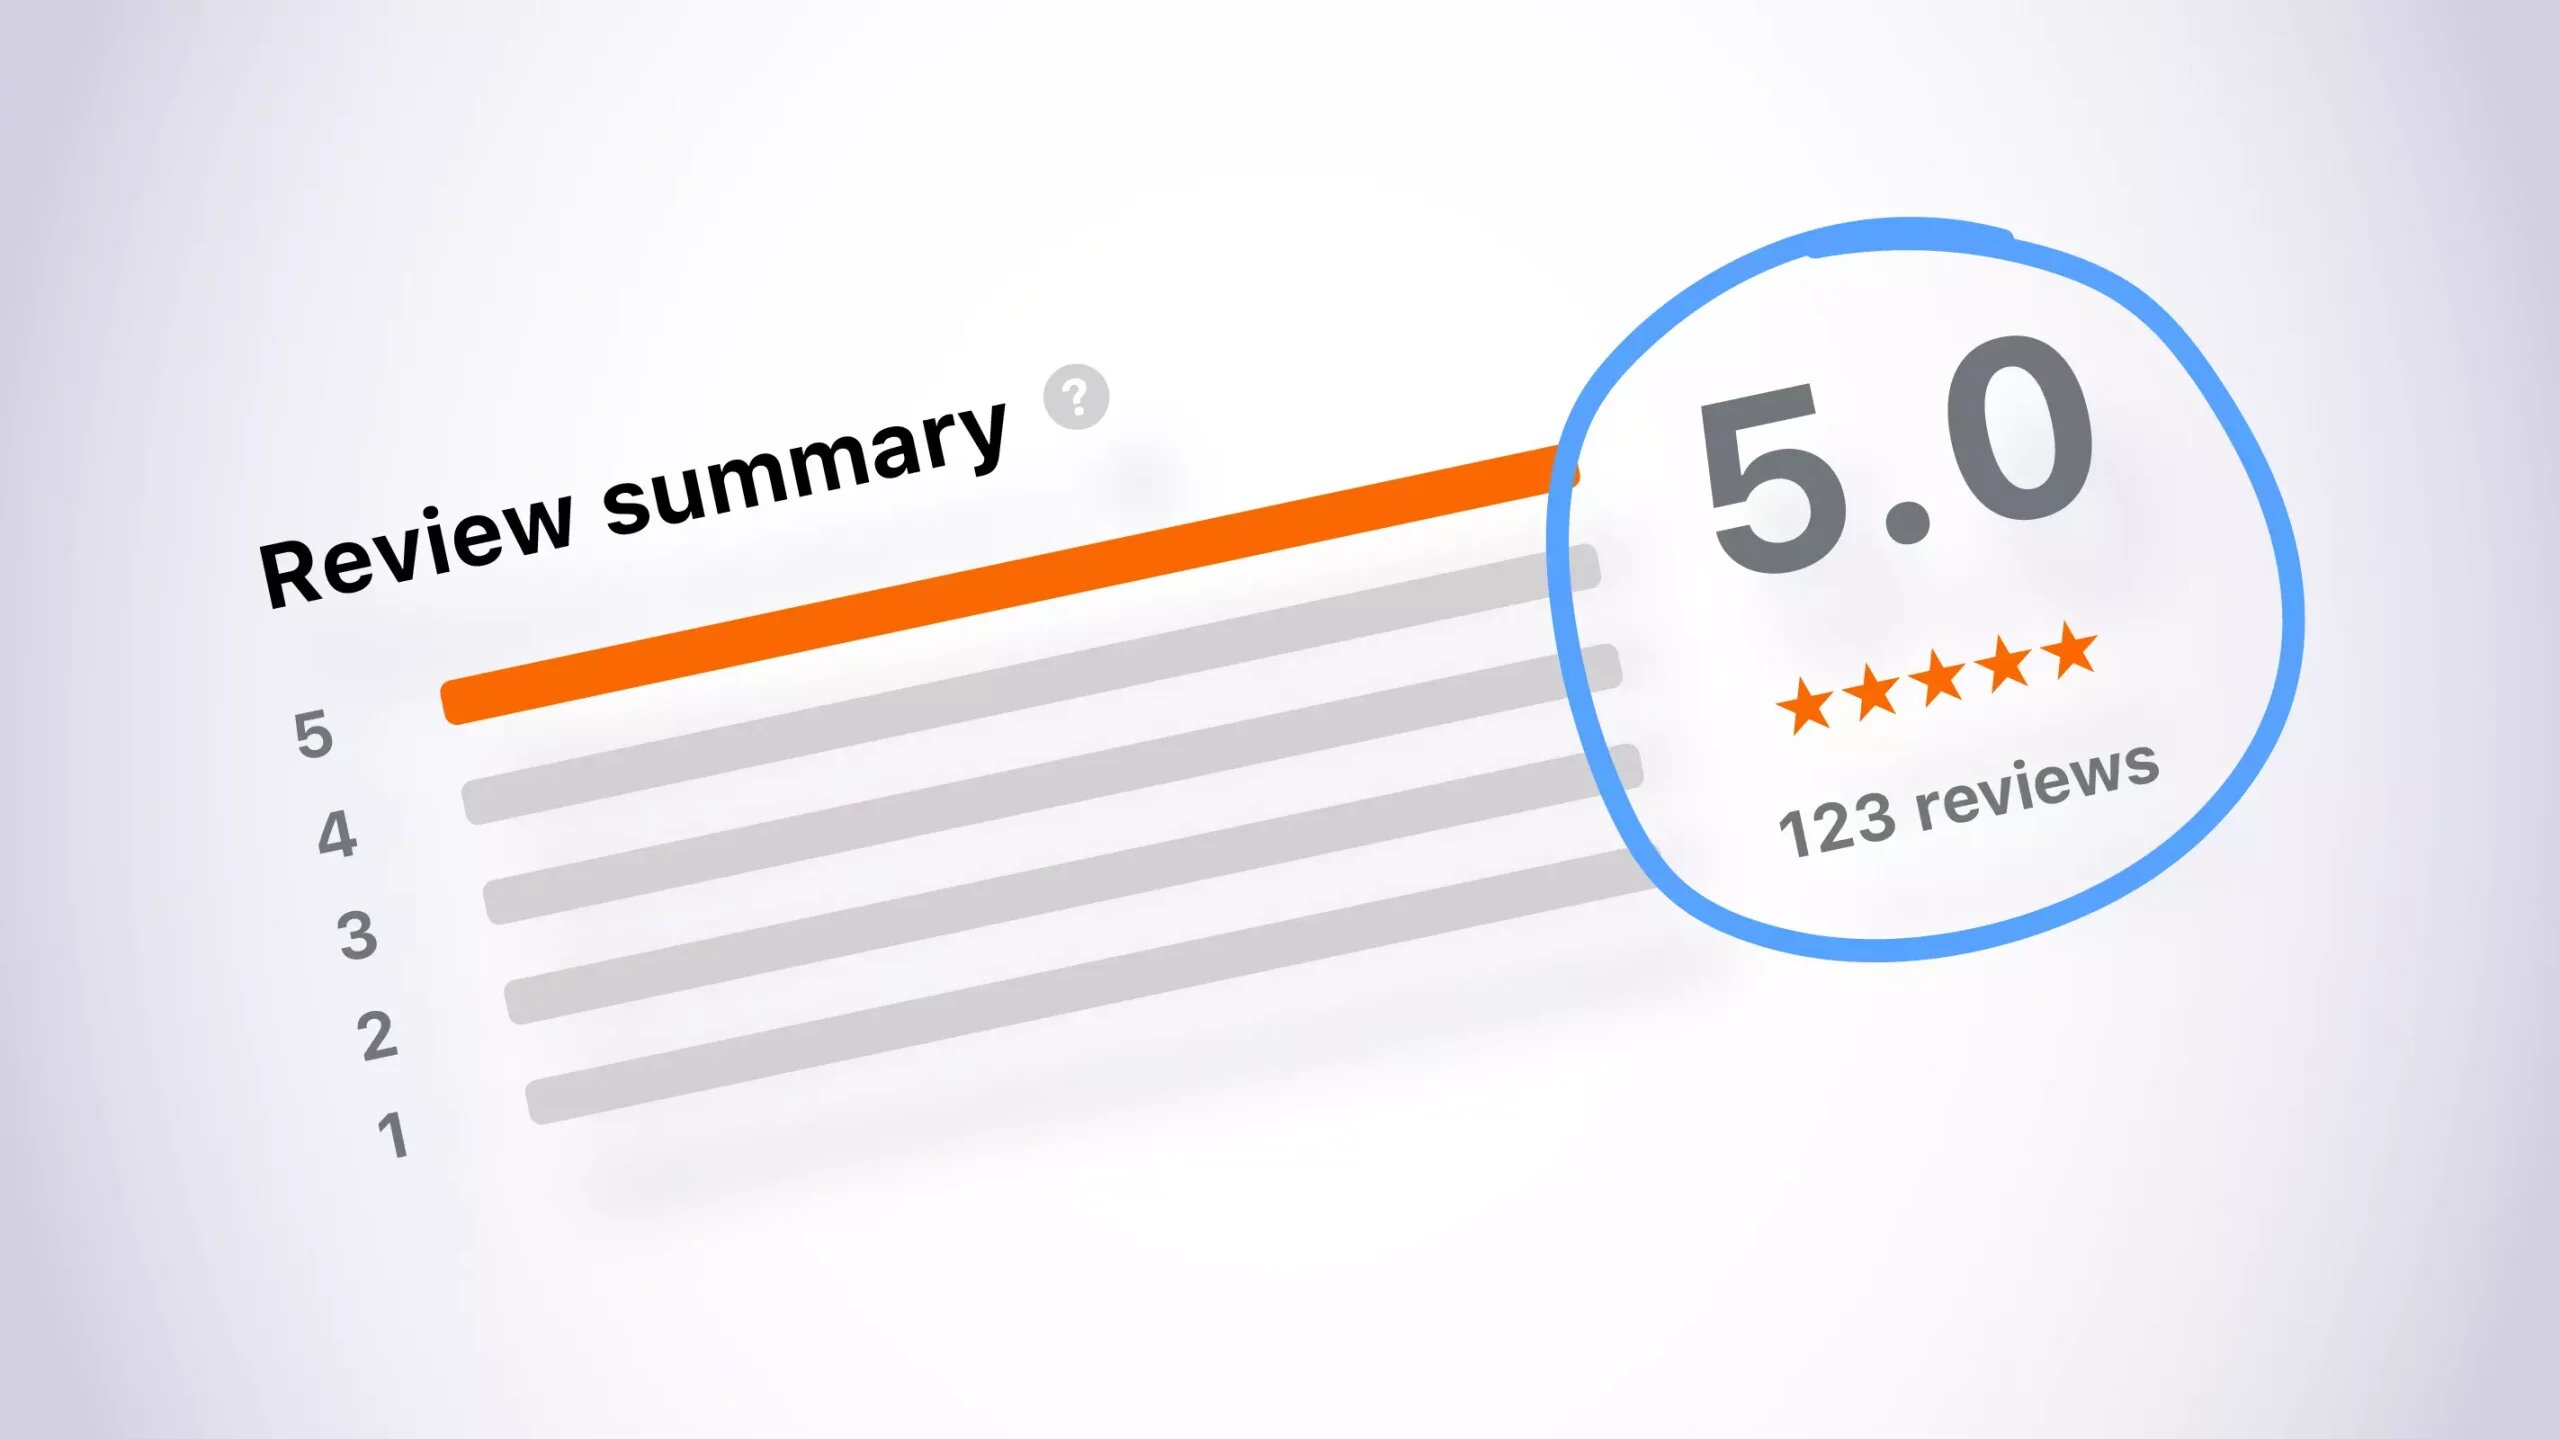 image showing multiple 5.0 local reviews